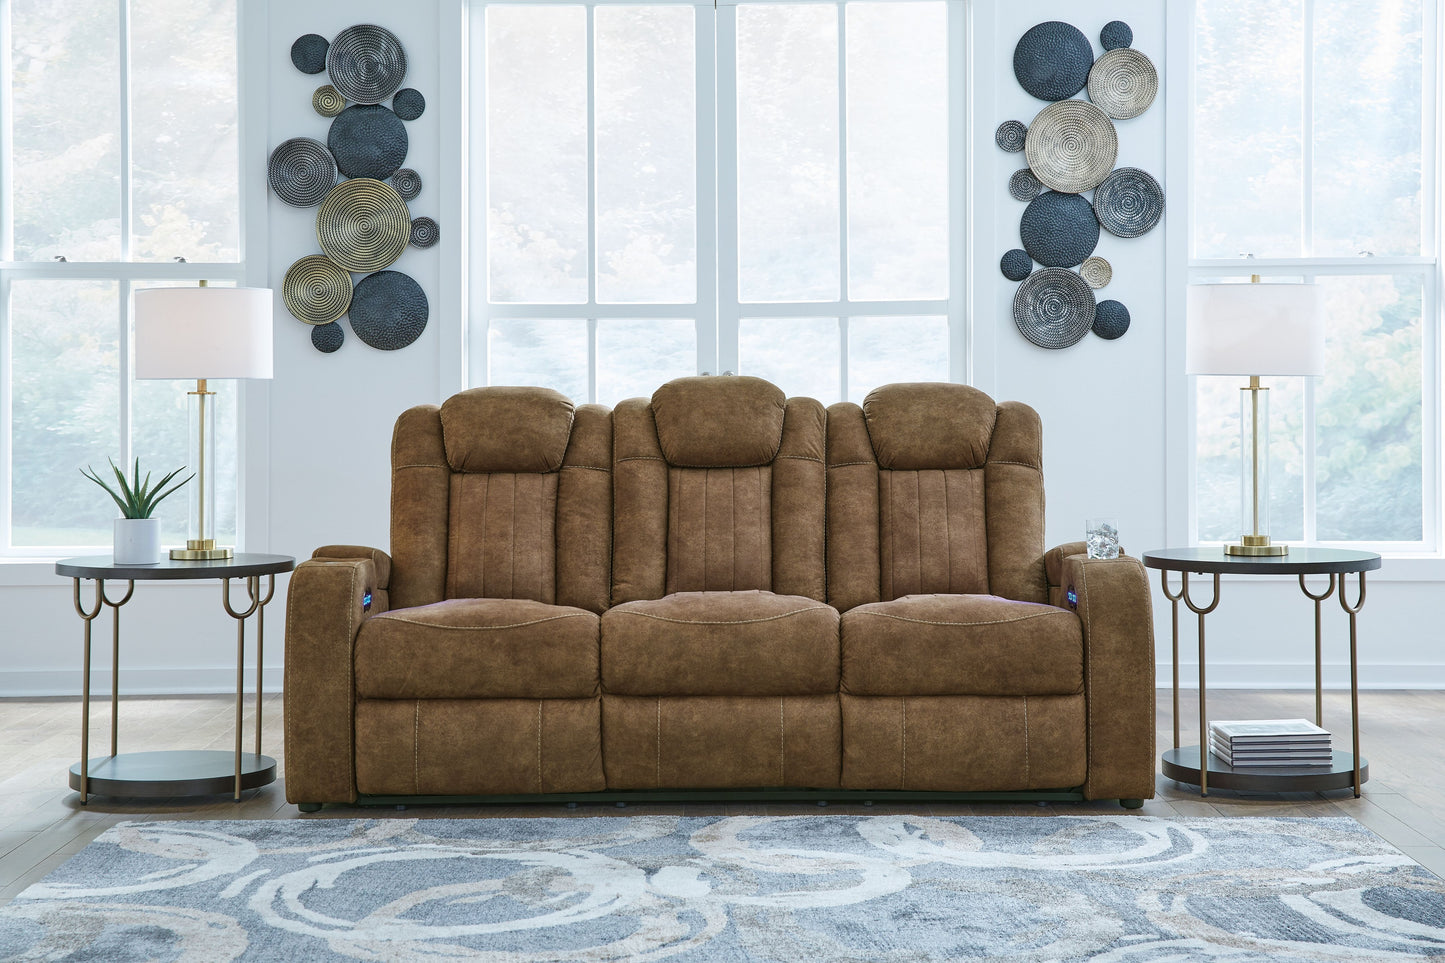 Wolfridge - Brindle - 2 Pc. - Power Reclining Sofa, Power Reclining Loveseat With Console